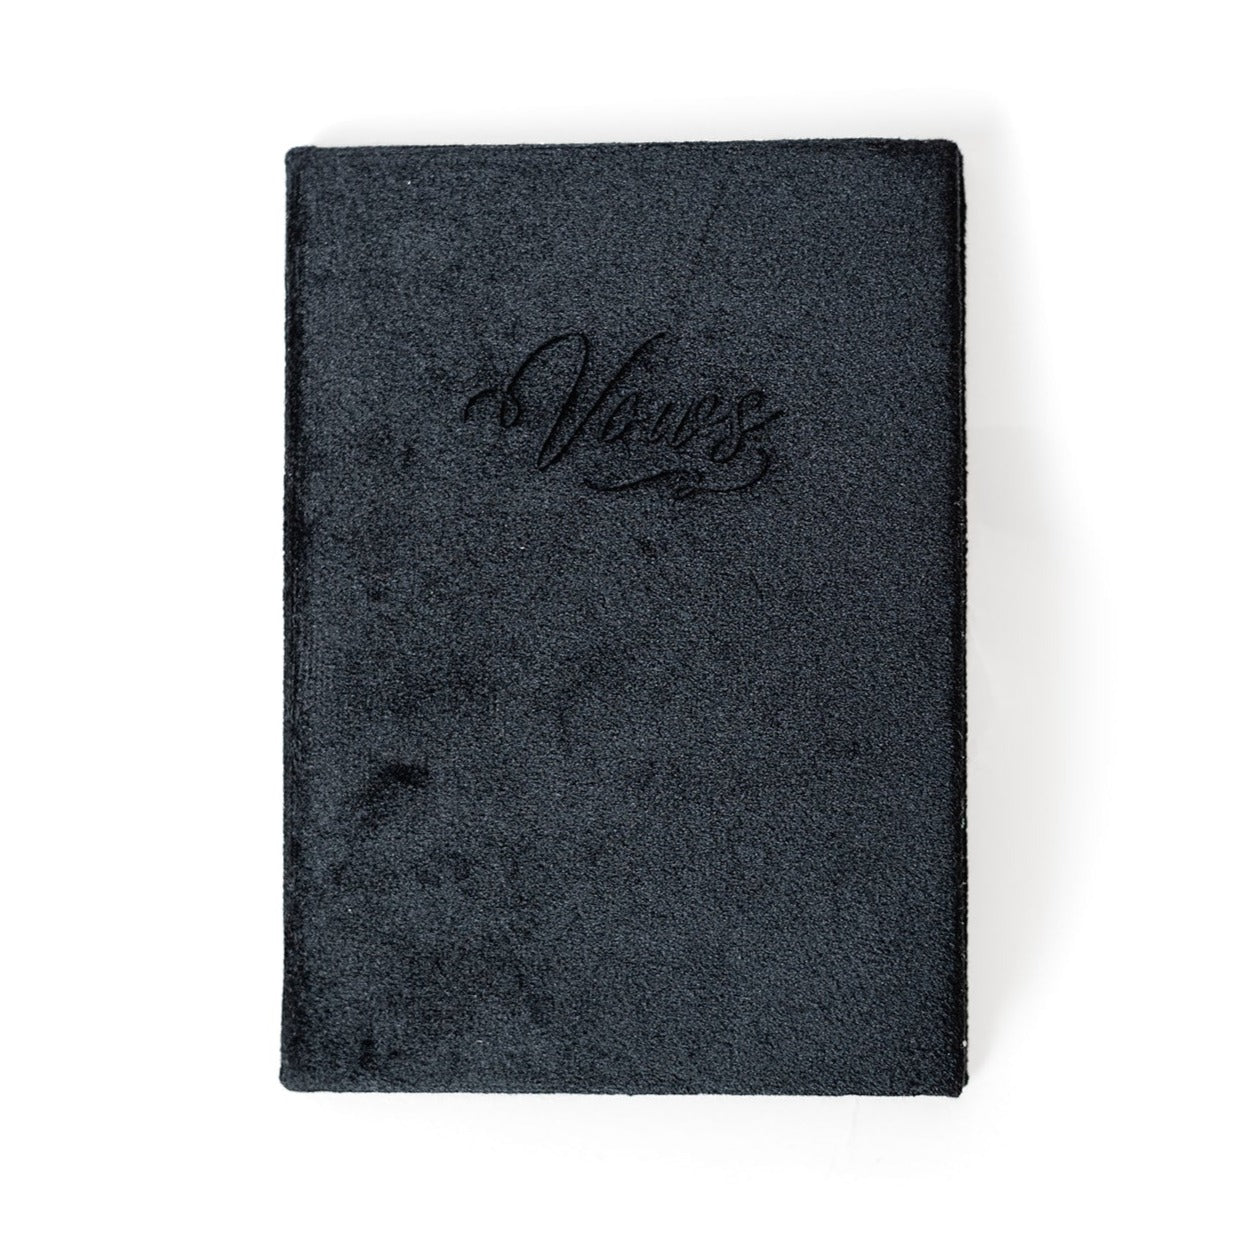 A black vow book with the word "Vows" embossed on the front cover.